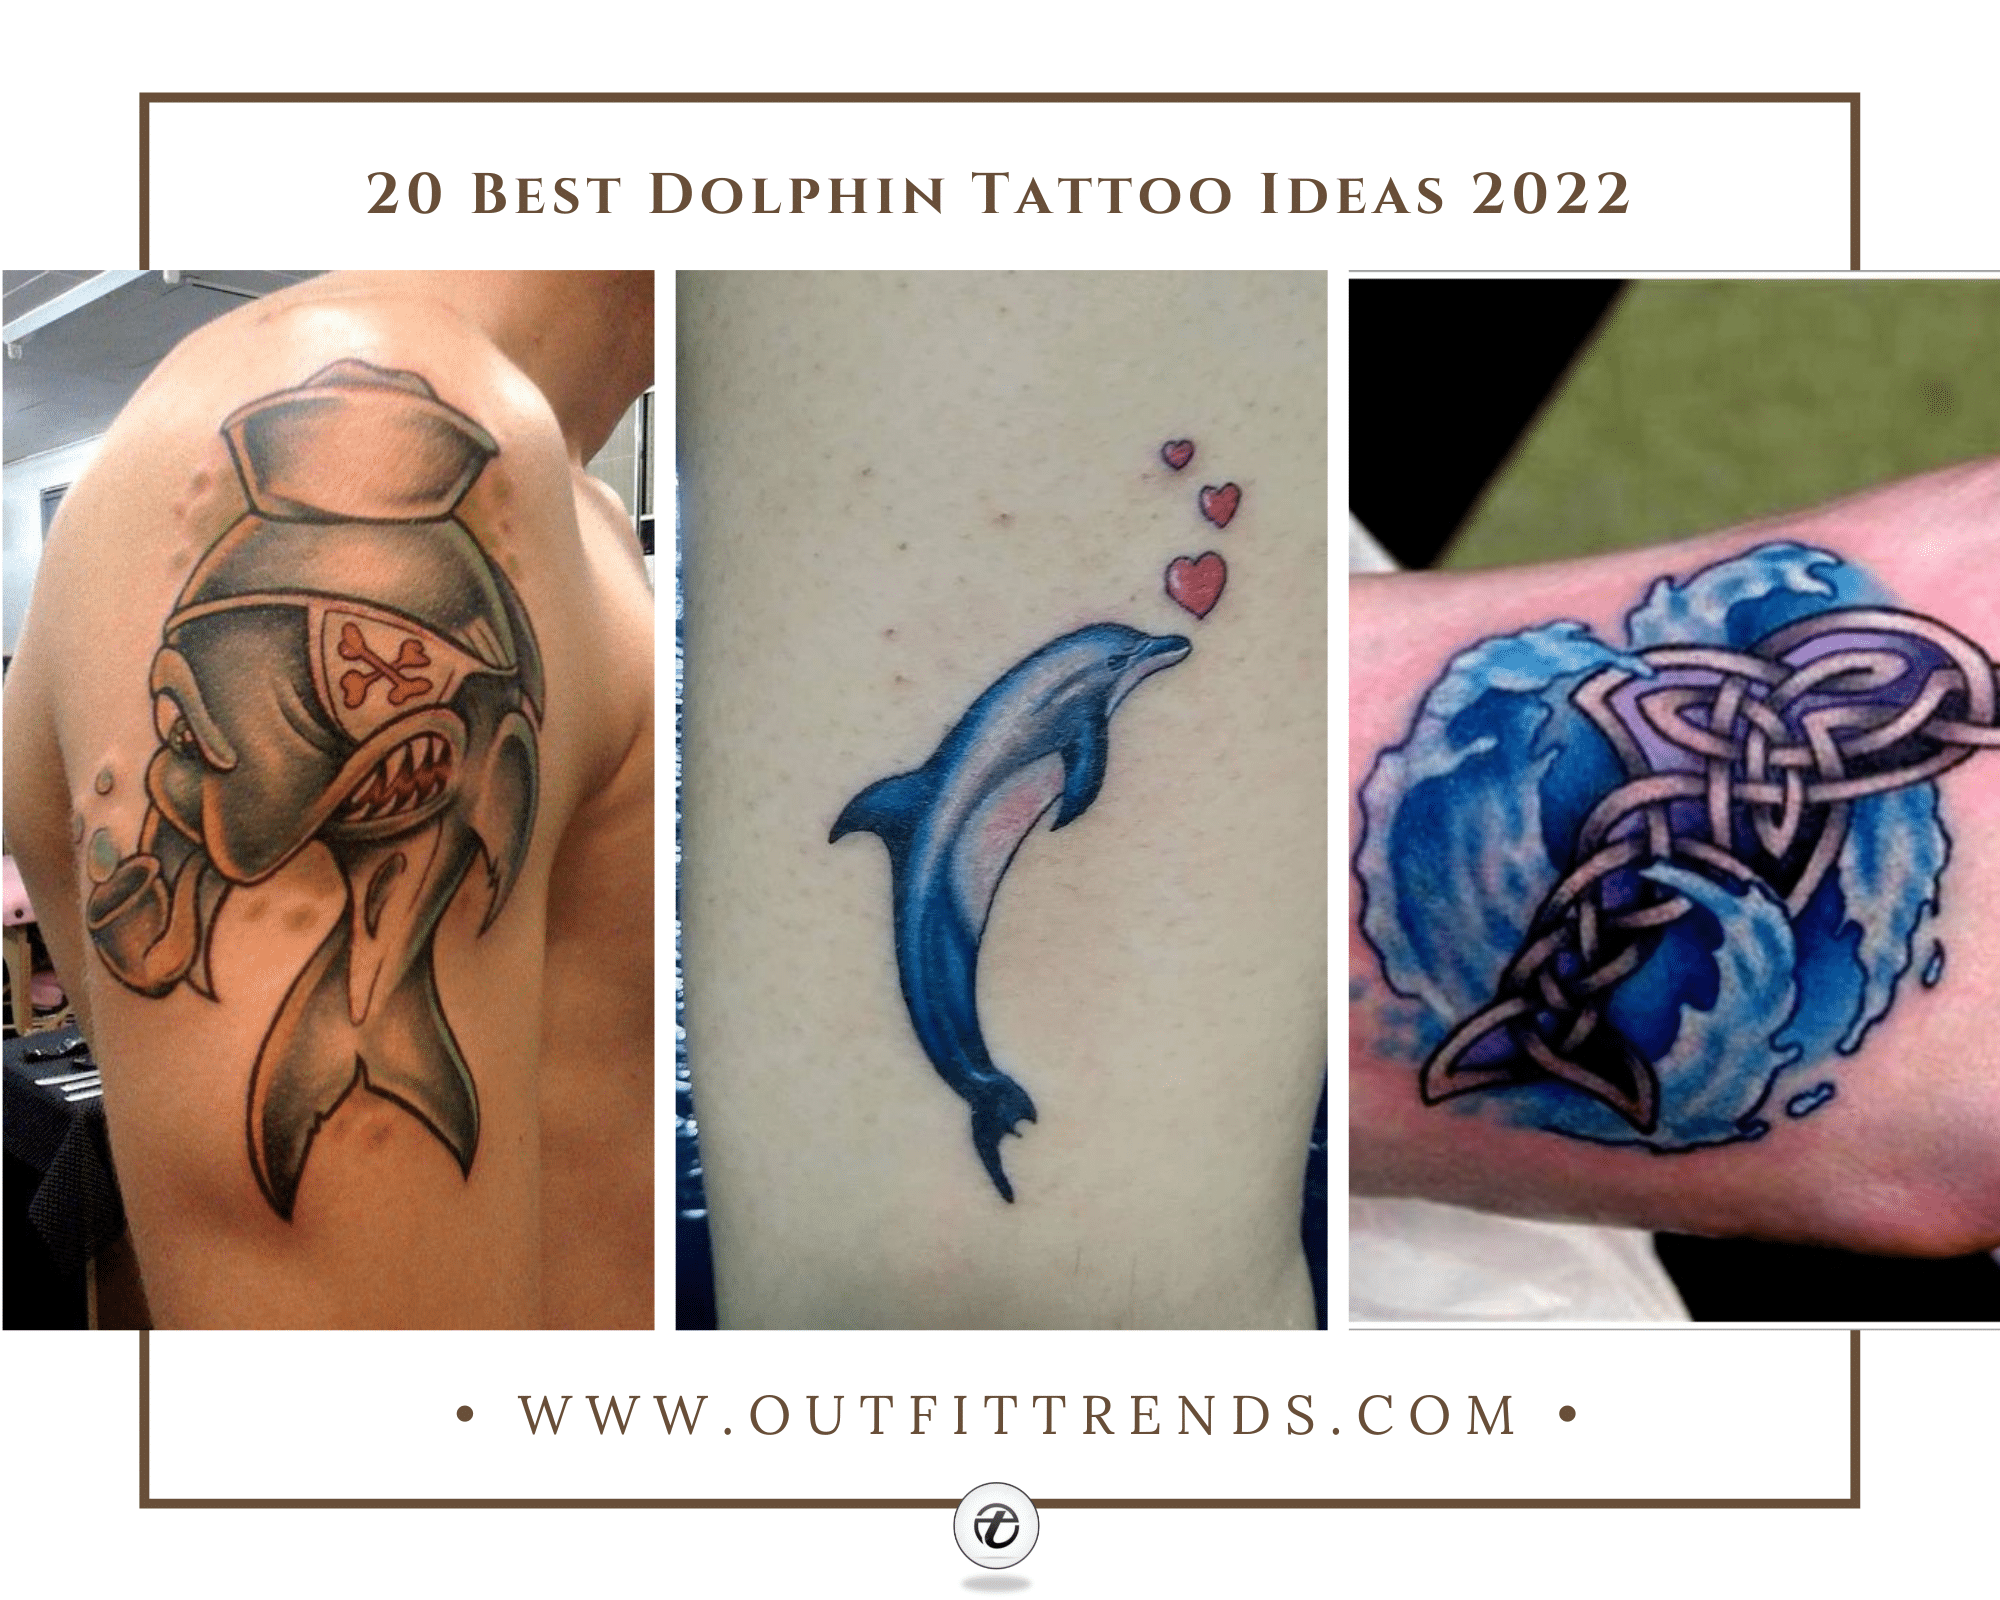 Small Dolphin Temporary Tattoo Transfers for Kids Children Parties 56439   eBay